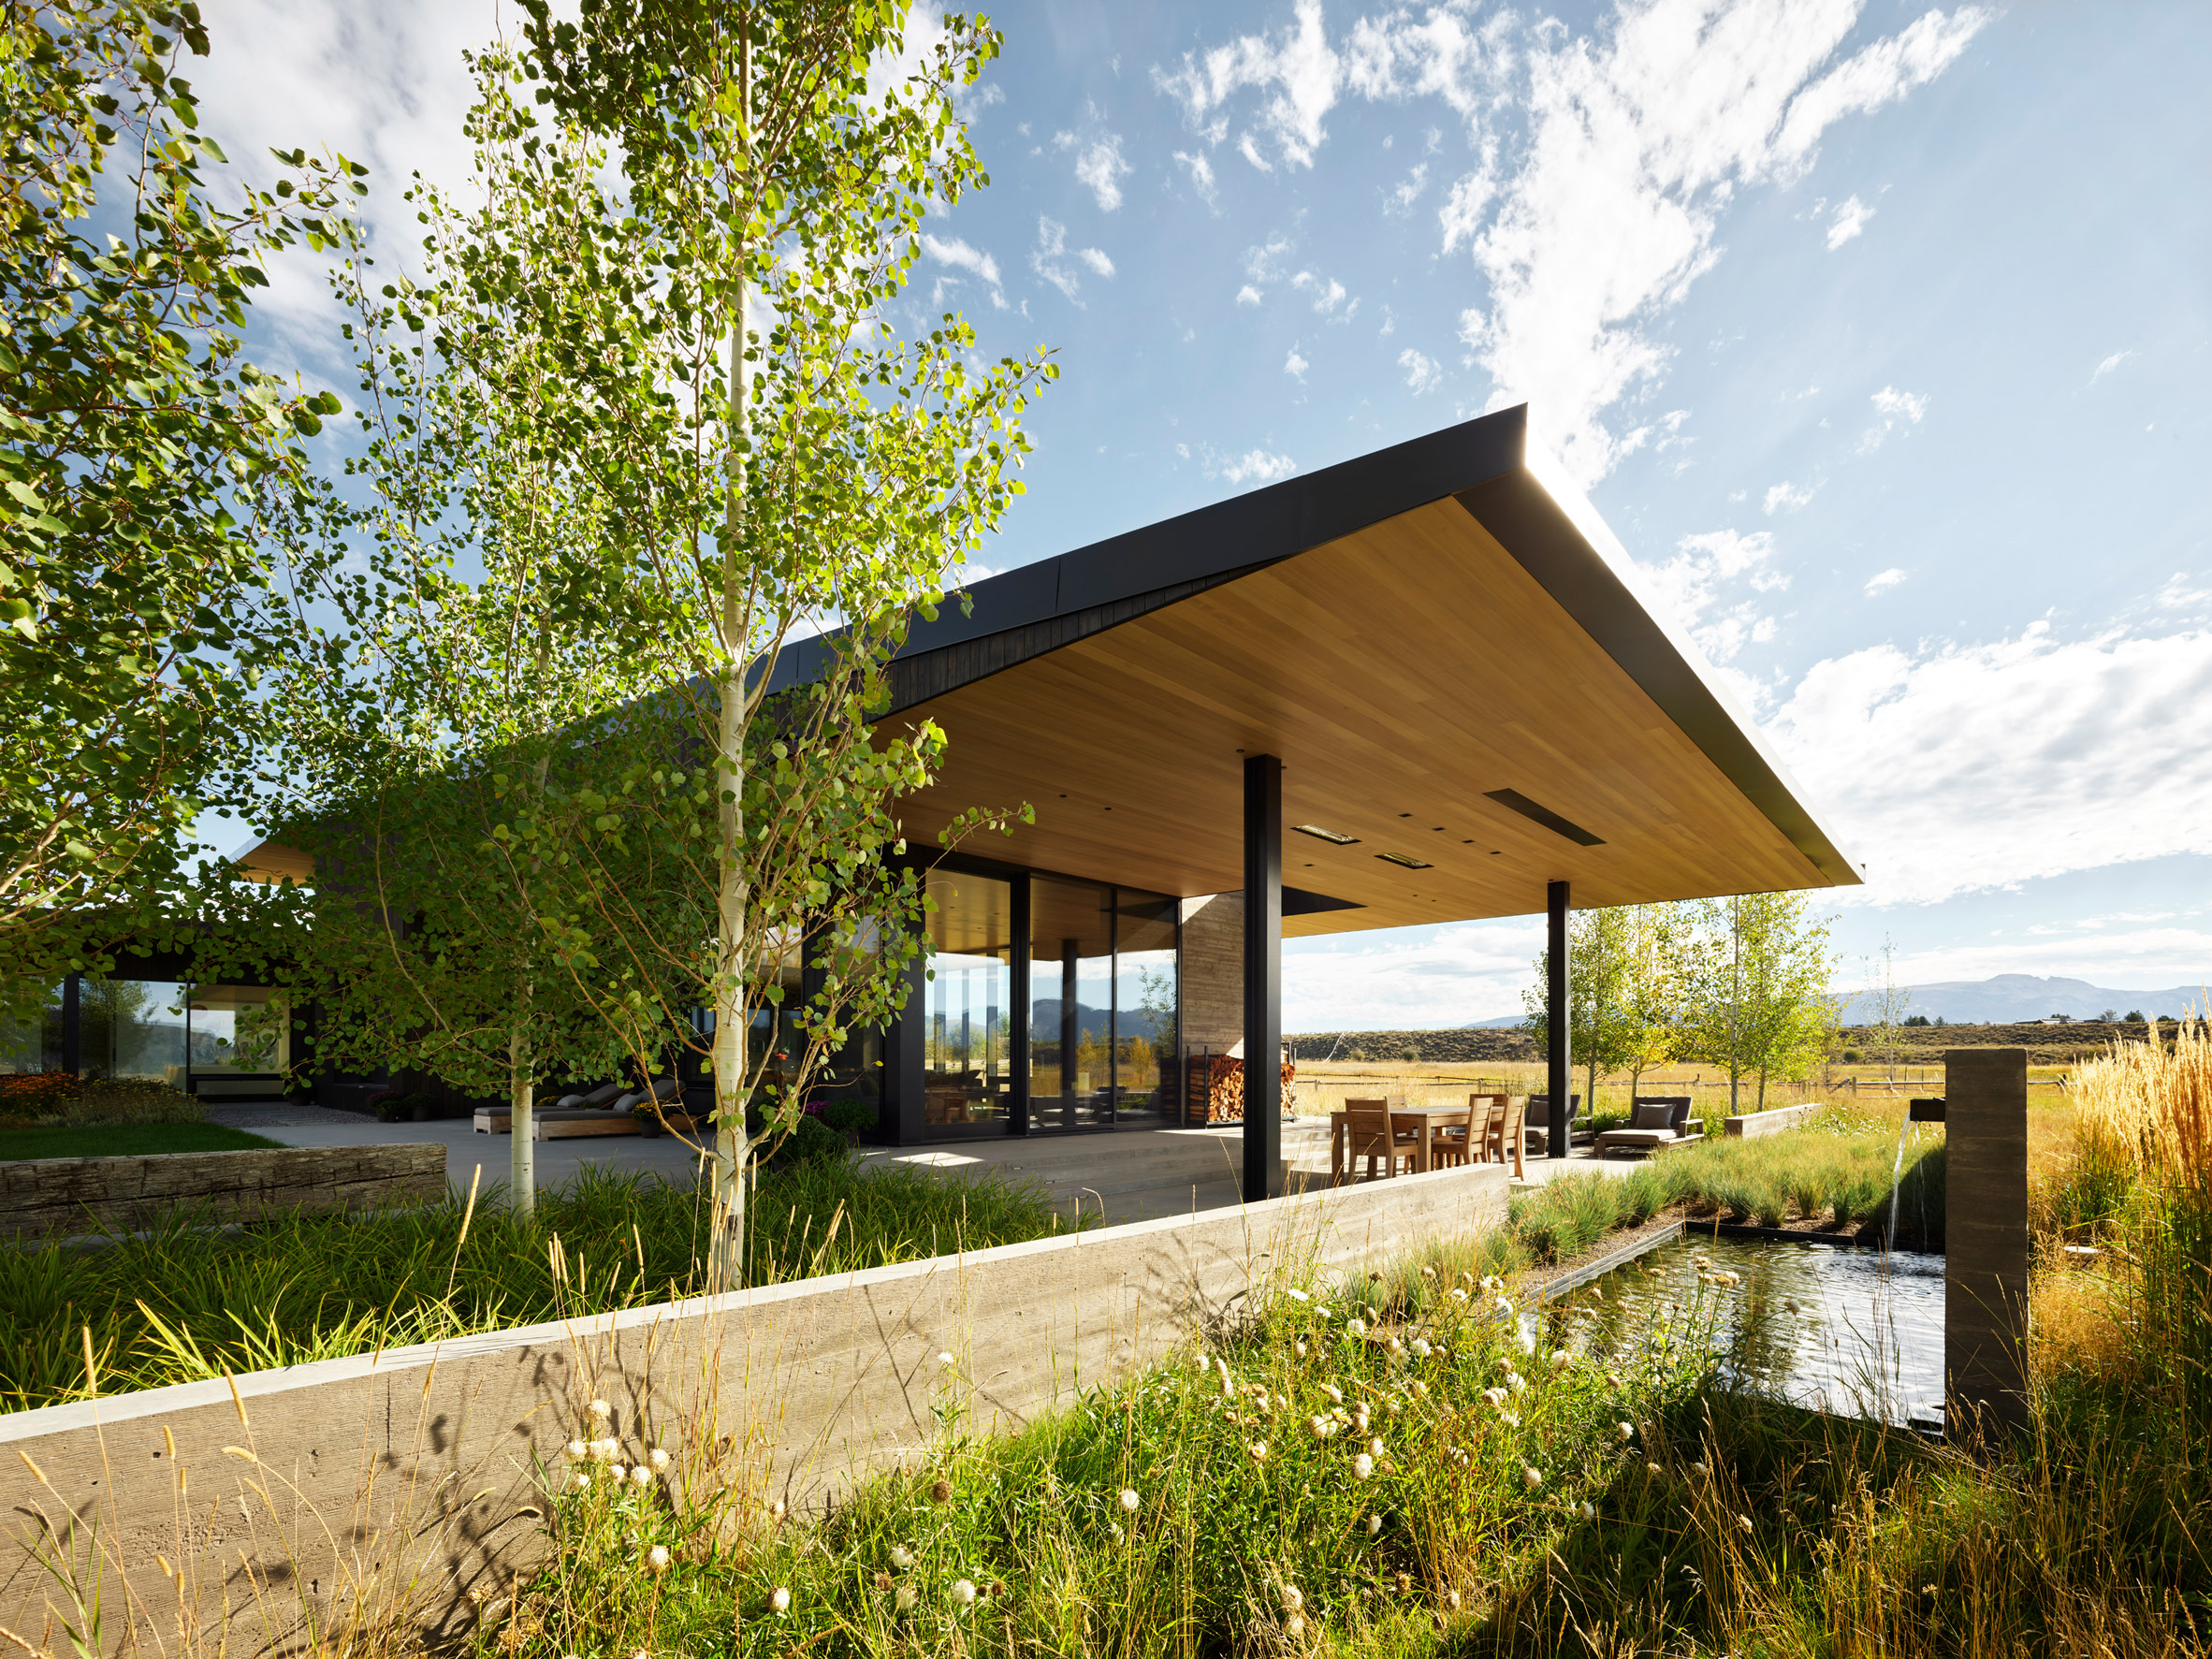 Cedar-clad home surrounded by vegetation in Wyoming